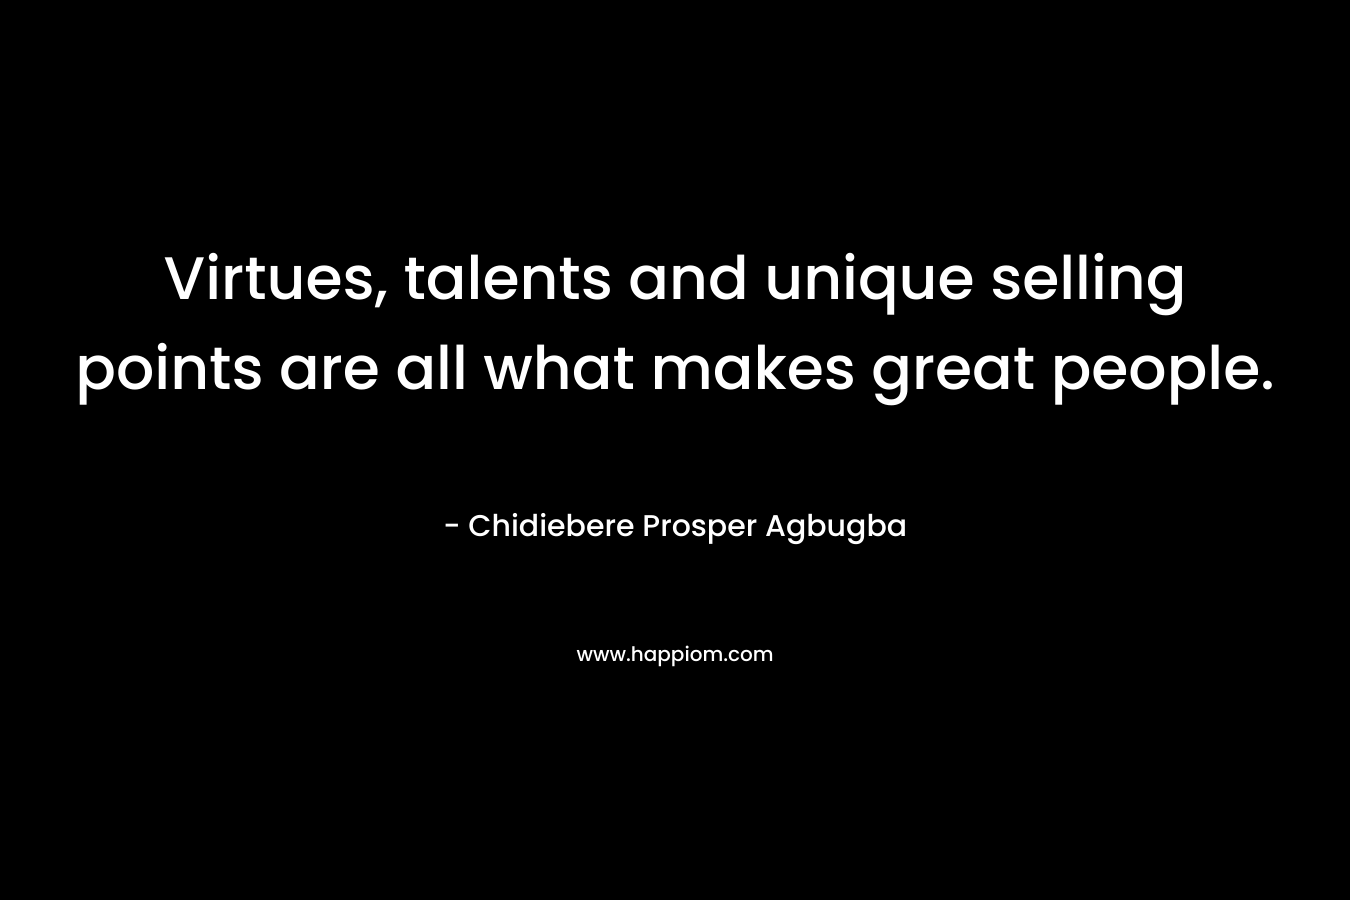 Virtues, talents and unique selling points are all what makes great people. – Chidiebere Prosper Agbugba